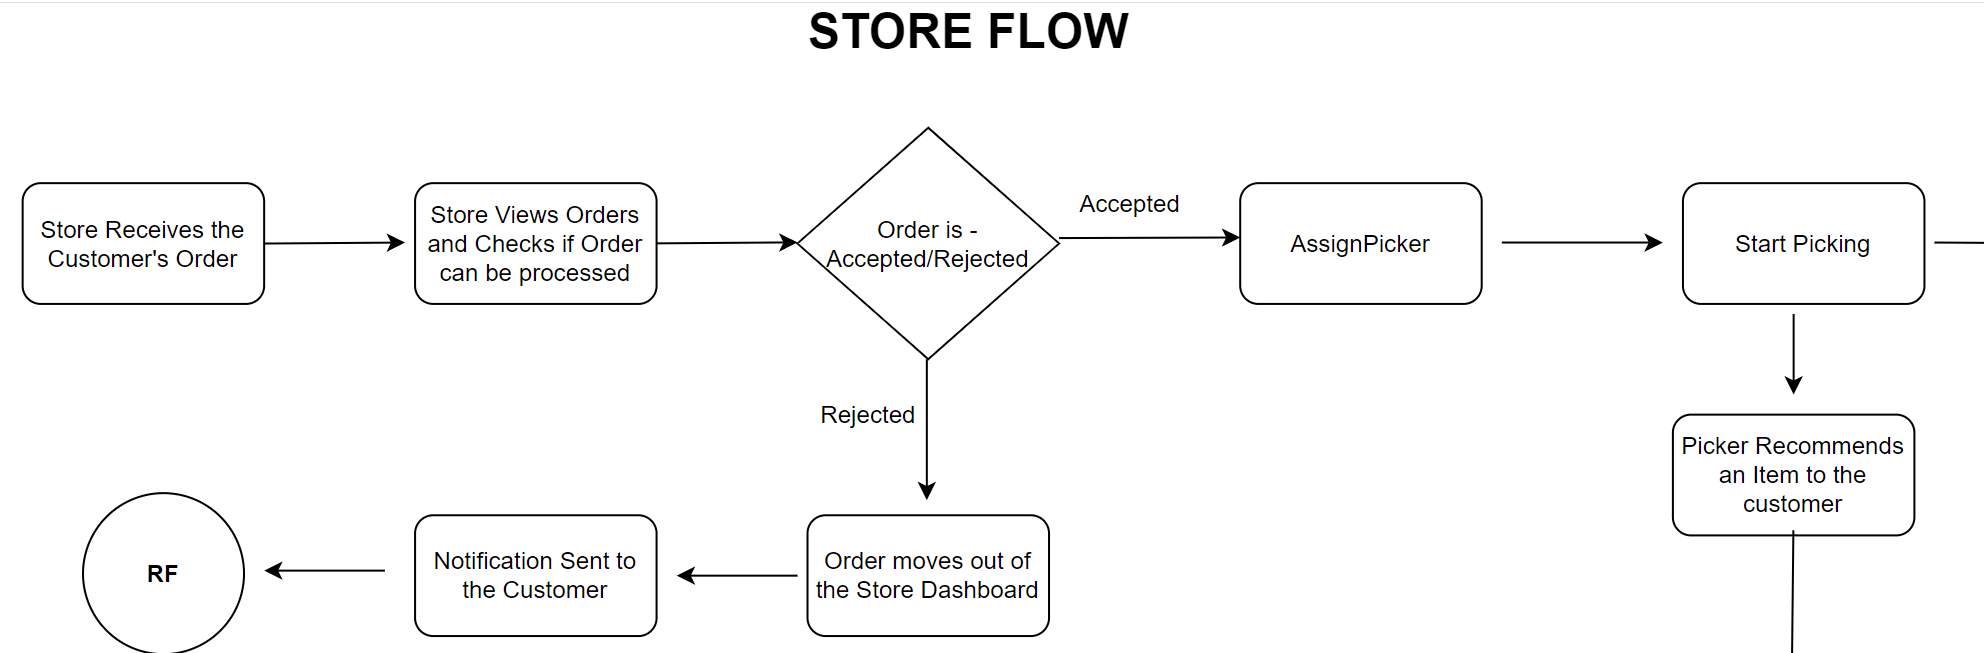 store workflow for picker app - accept orders